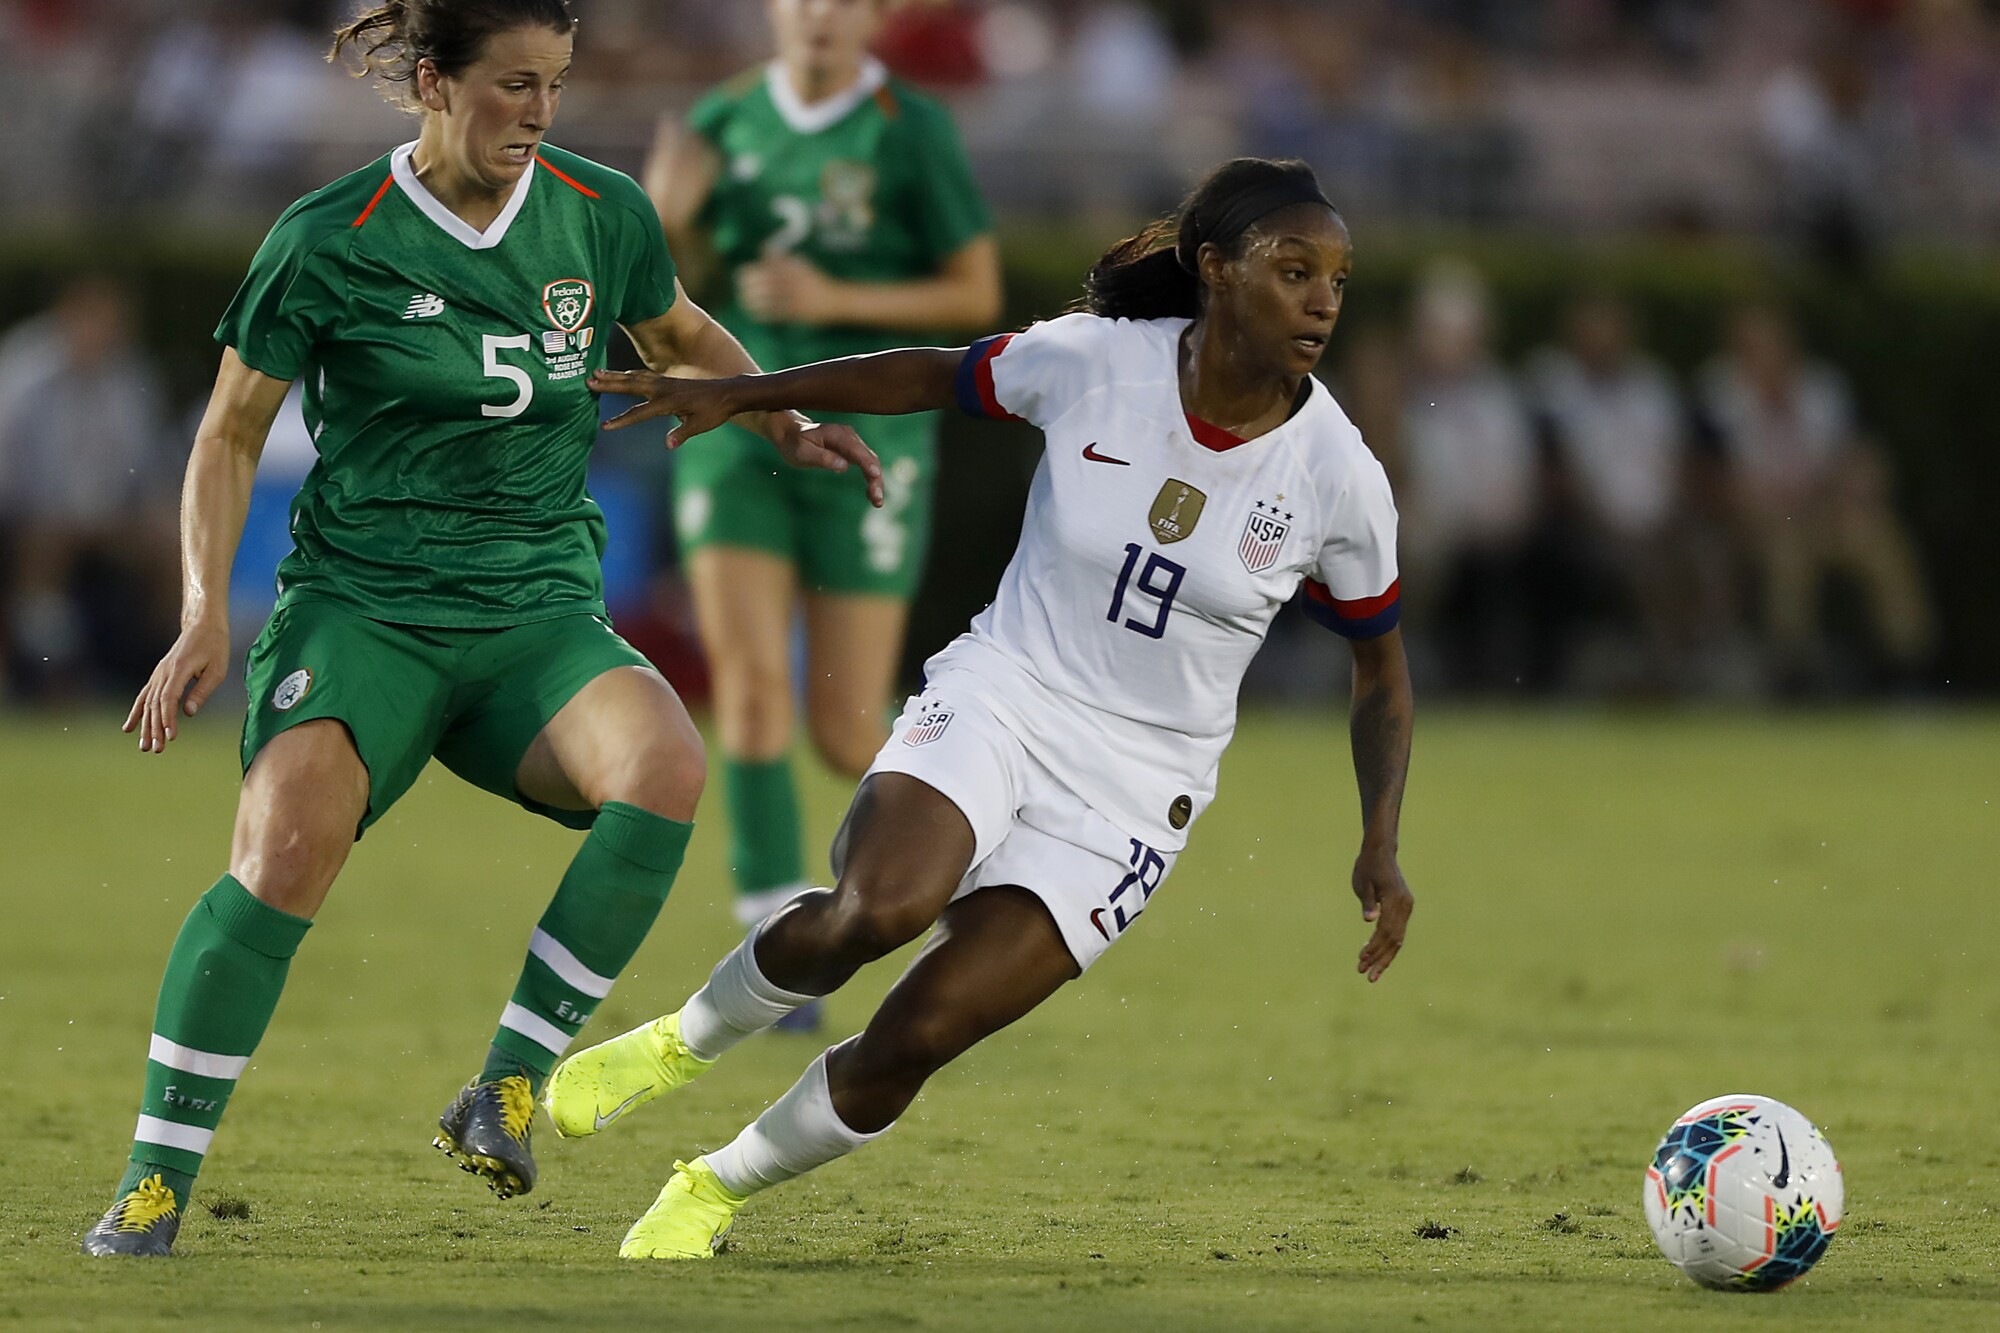 U.S. defender Crystal Dunn dribbles past Ireland defender Niamh Fahney during a match at the Rose Bowl in Pasadena. 